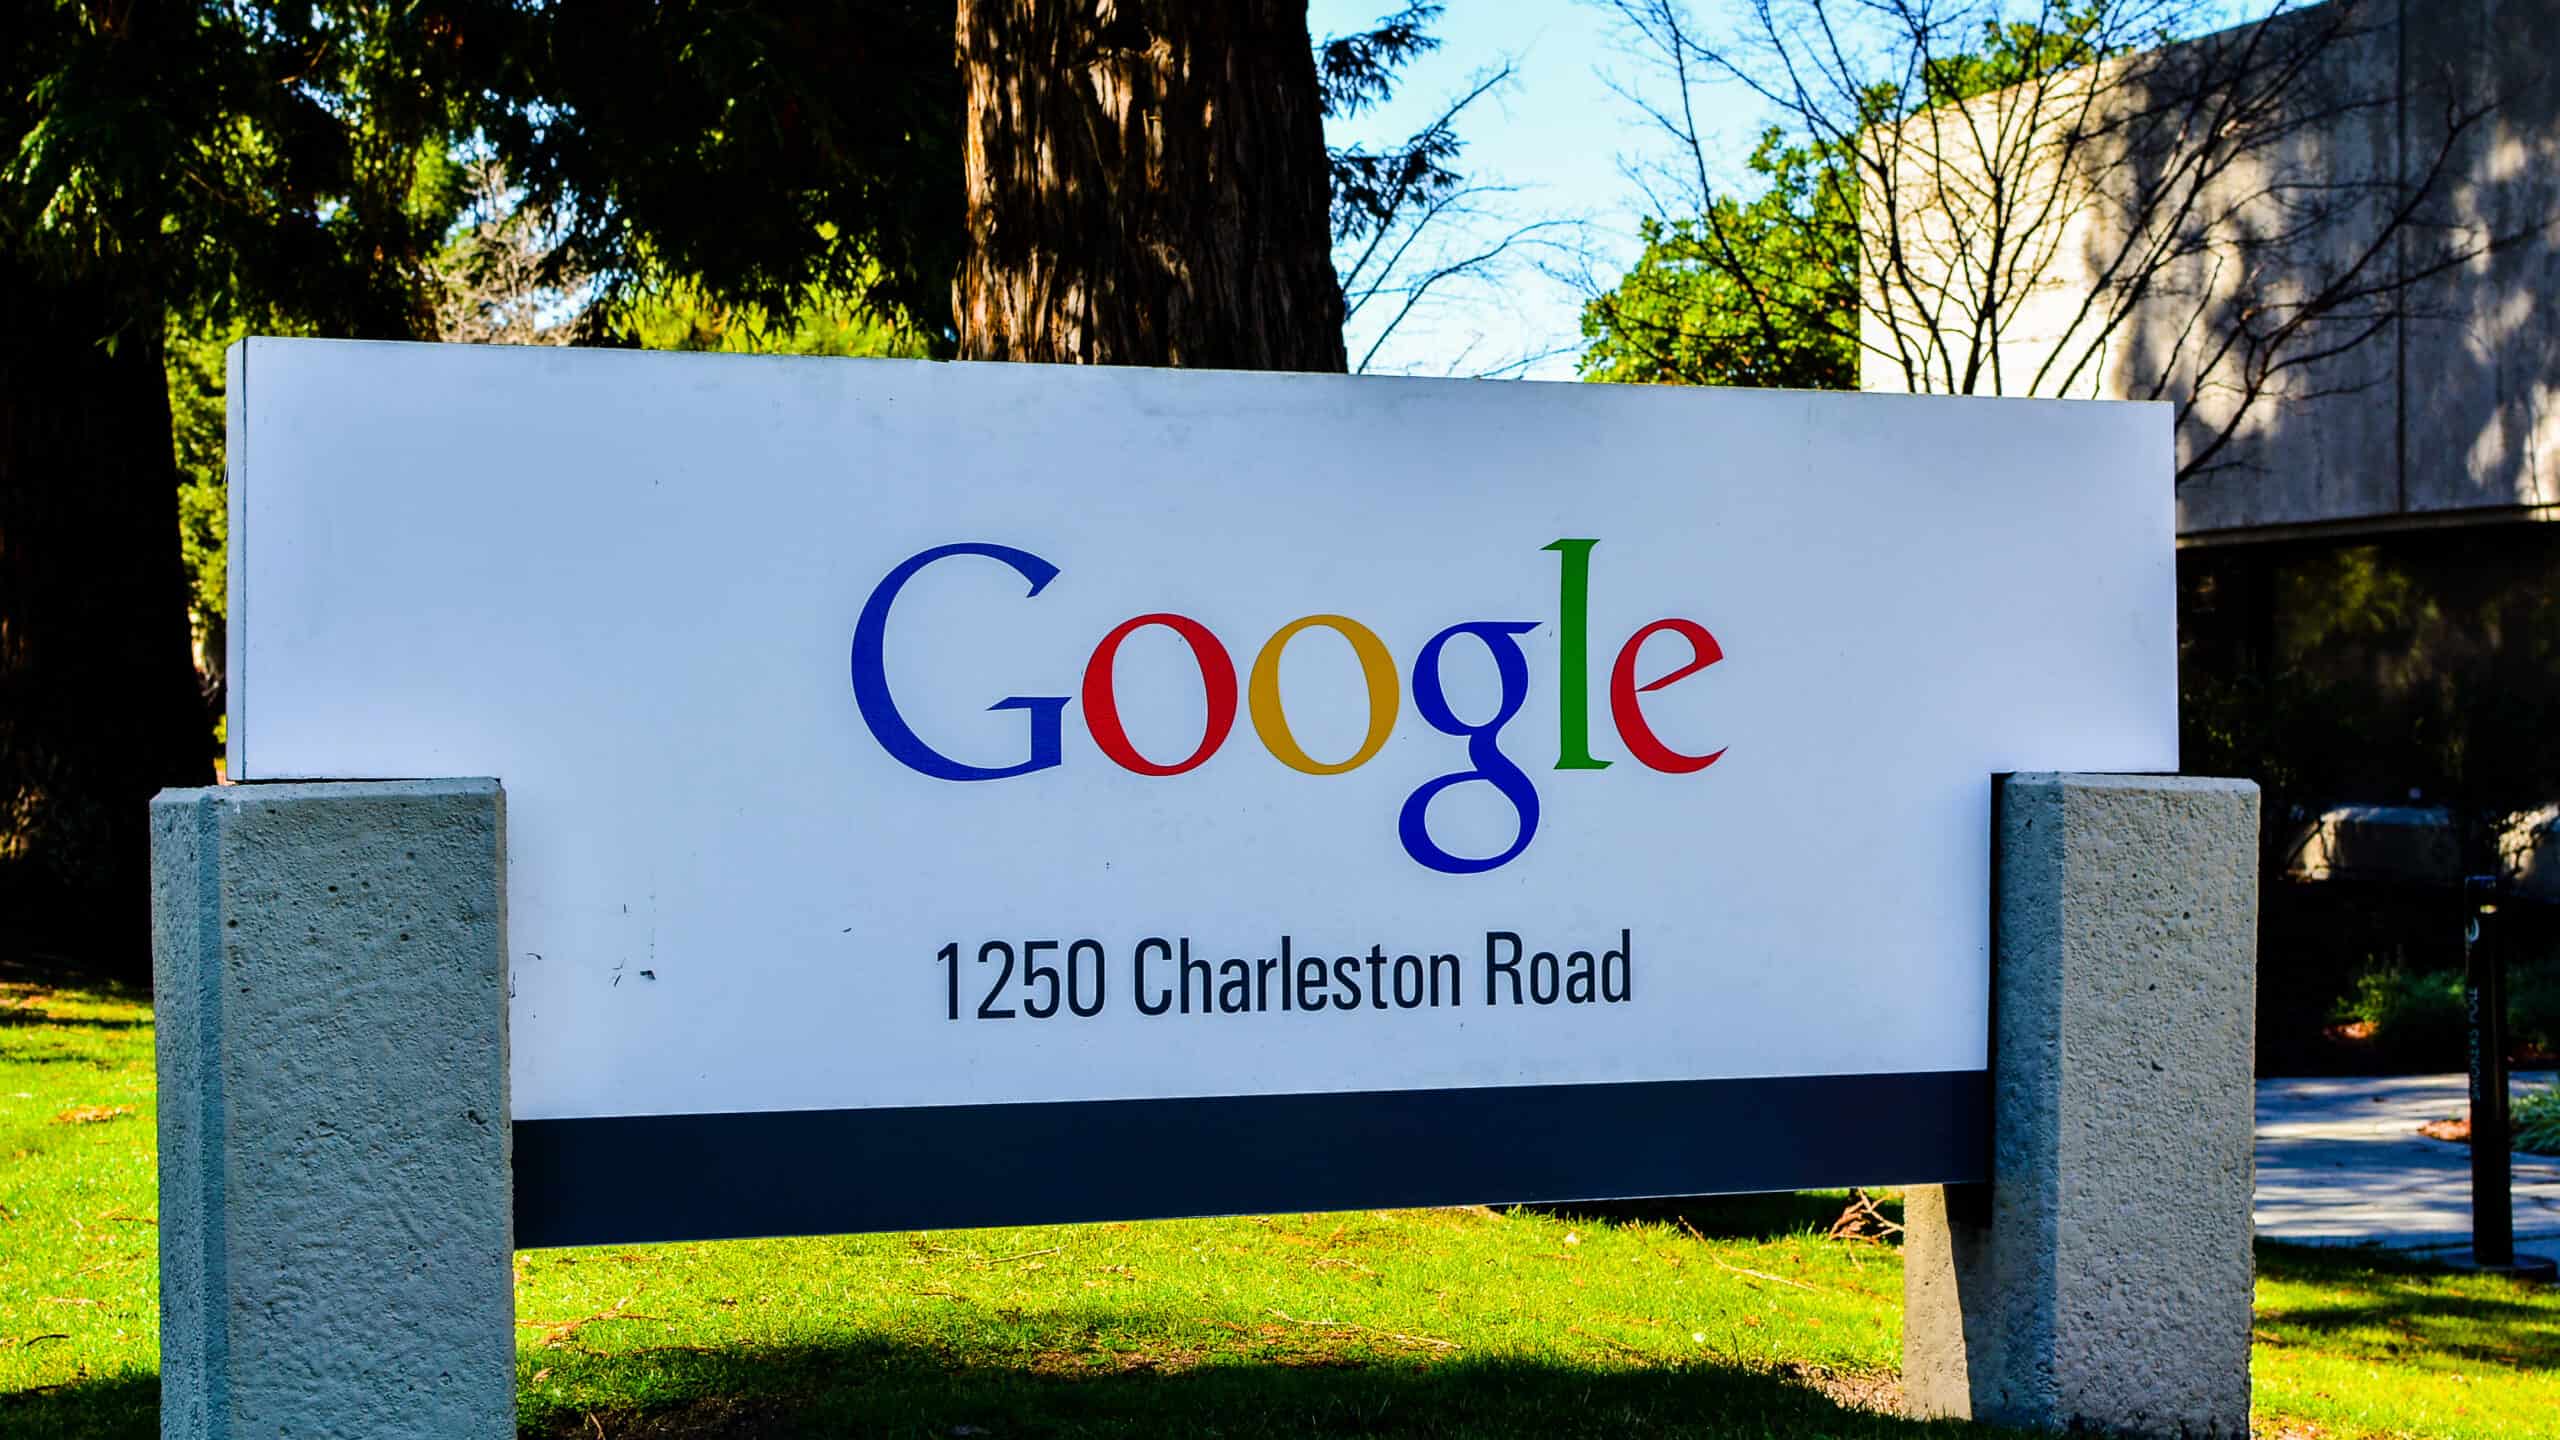 Google sign in Mountain View, CA, USA